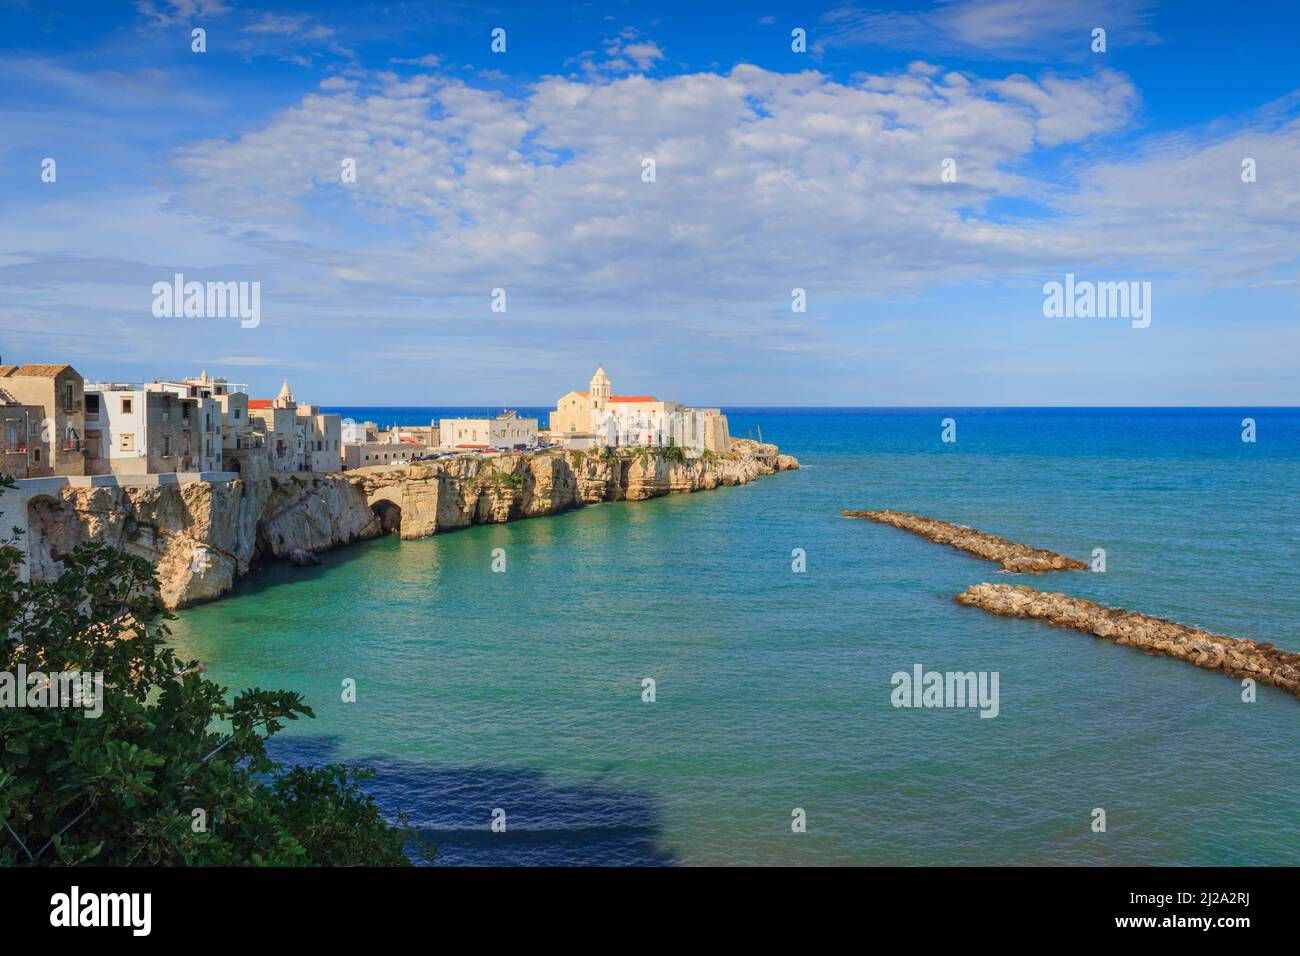 Gargano coast: bay of Vieste, (Apulia) Italy. Panoramic view of the old town. The medieval center perches on a small rocky peninsula. Stock Photo